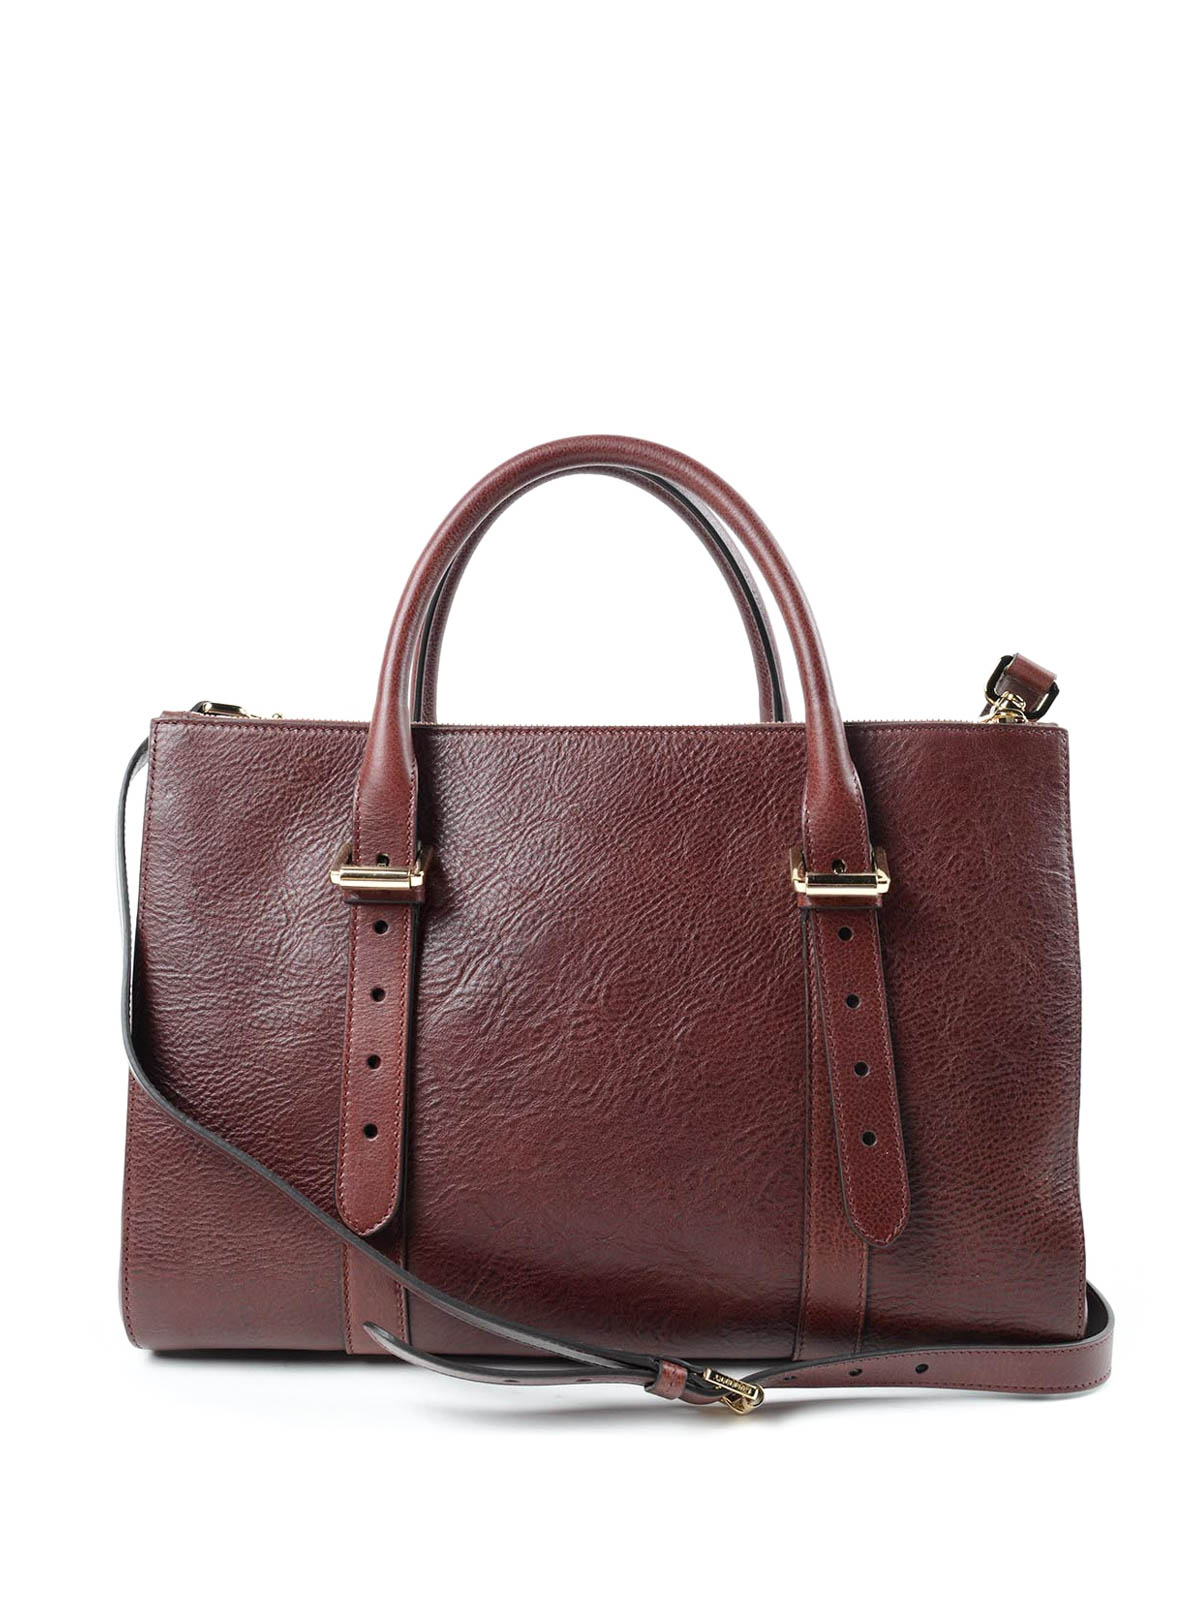 Mulberry - Bayswater tote - totes bags - HH3522173K195 | iKRIX.com